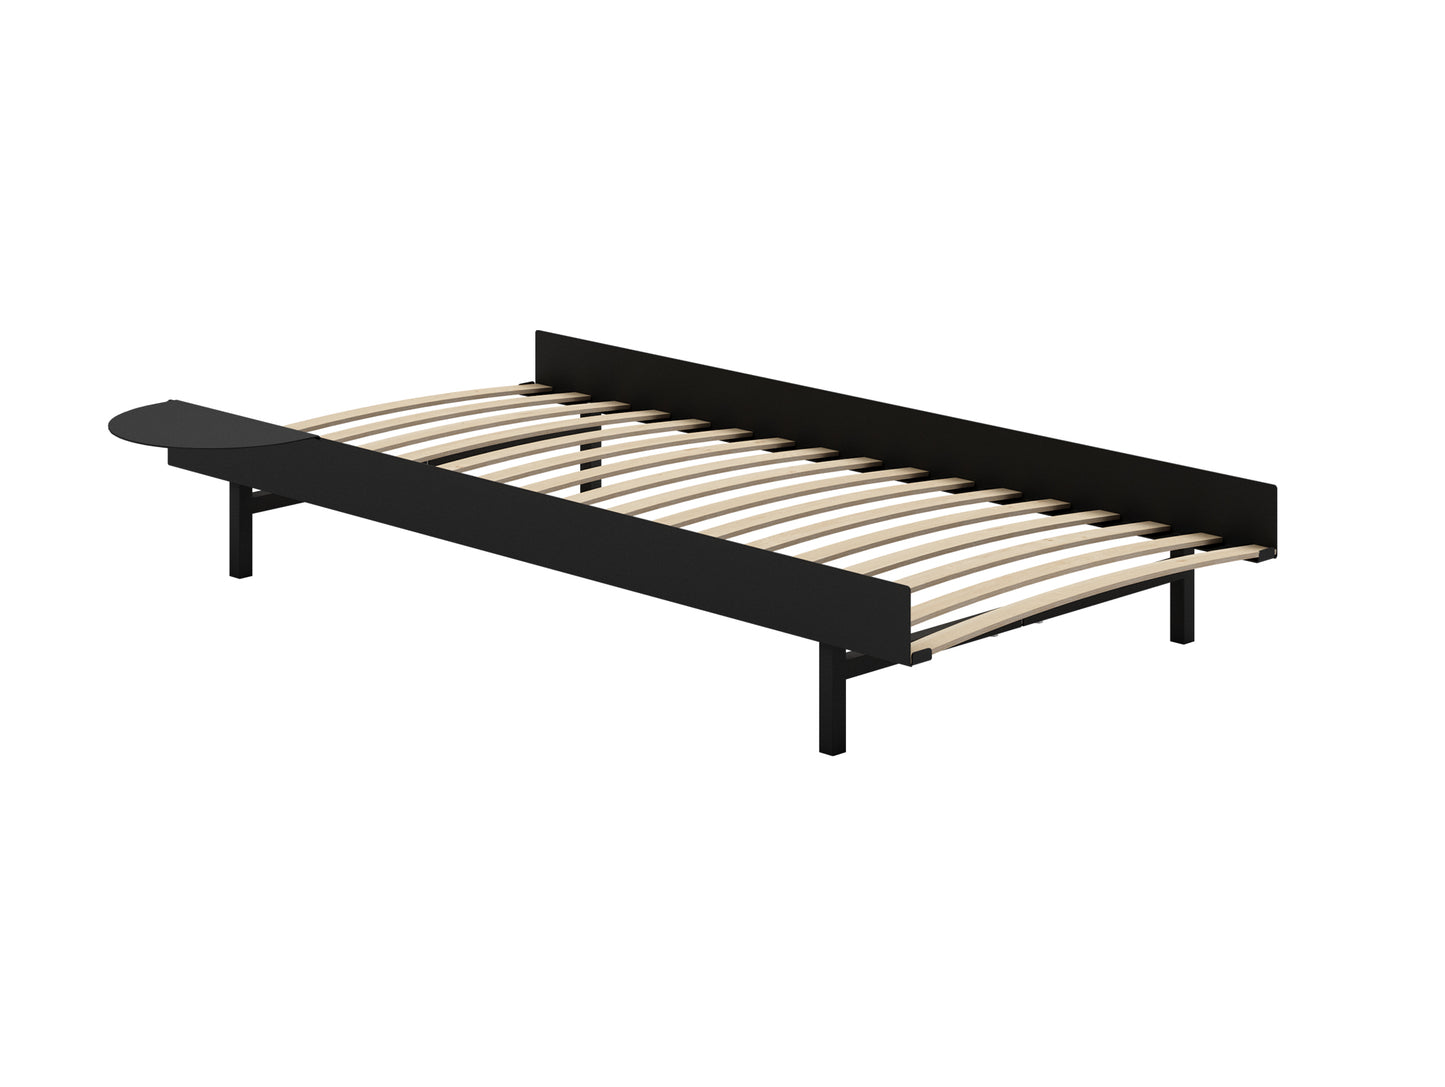 Bed 90 cm by Moebe - Black / 1 side table